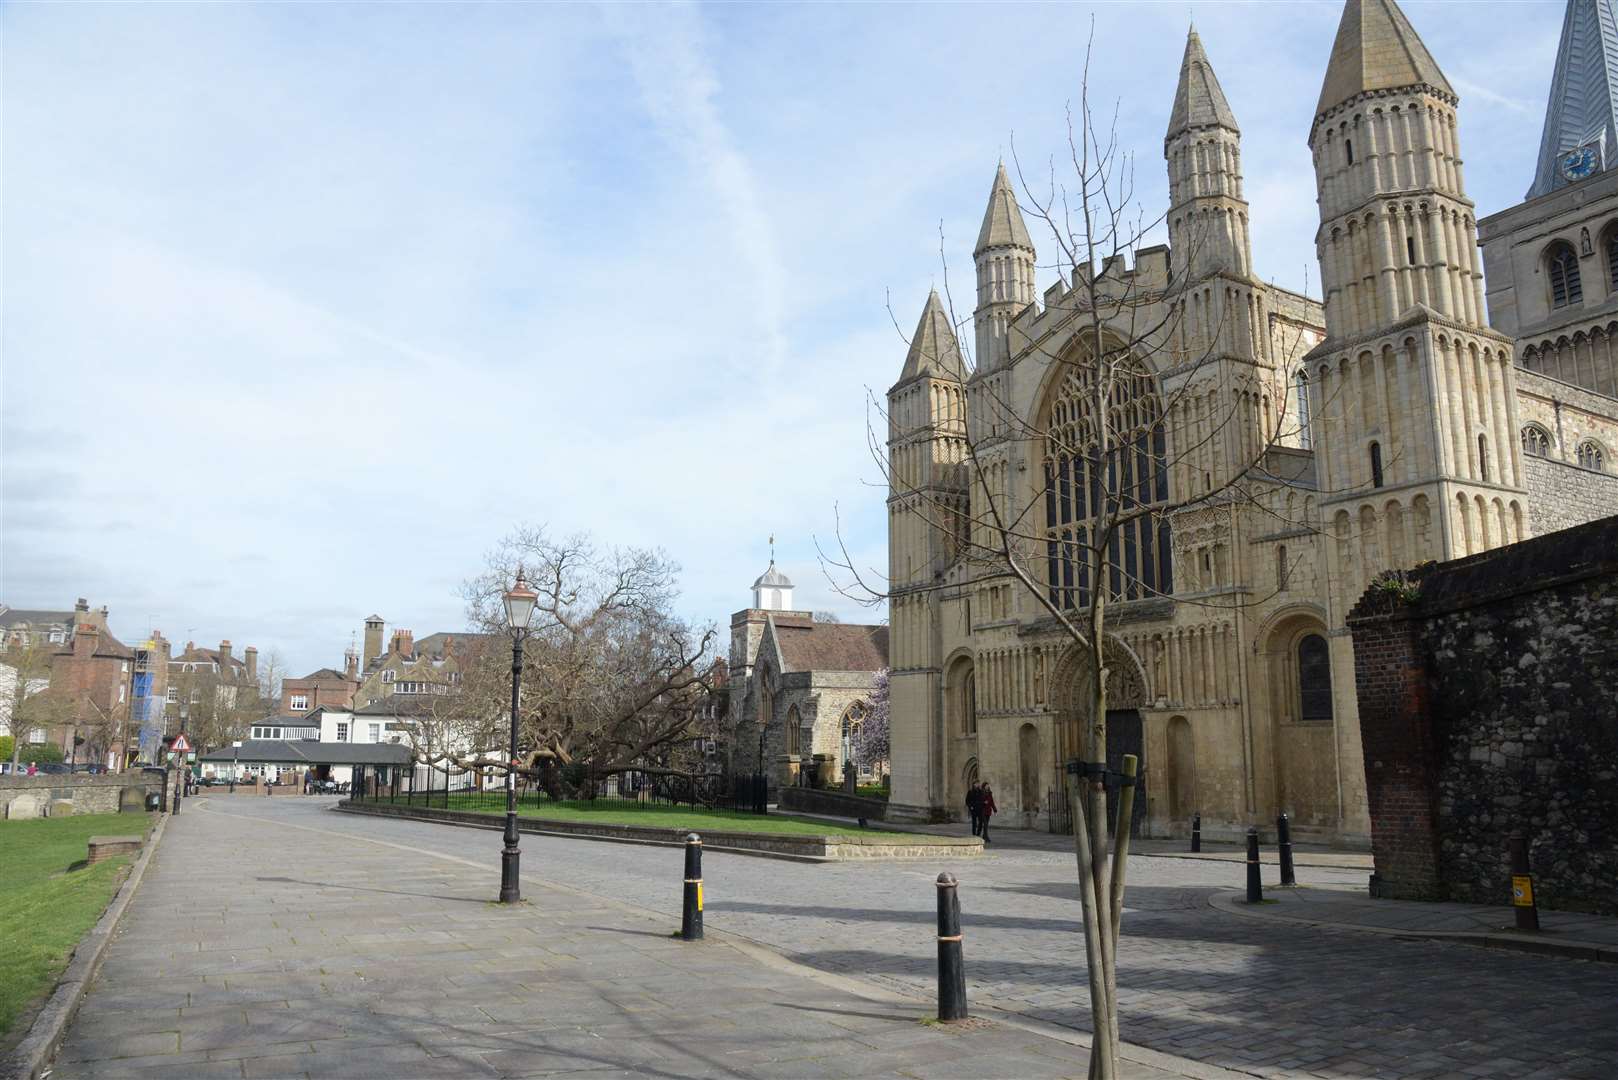 The area around Rochester Cathedral was quiet today. Picture: Chris Davey